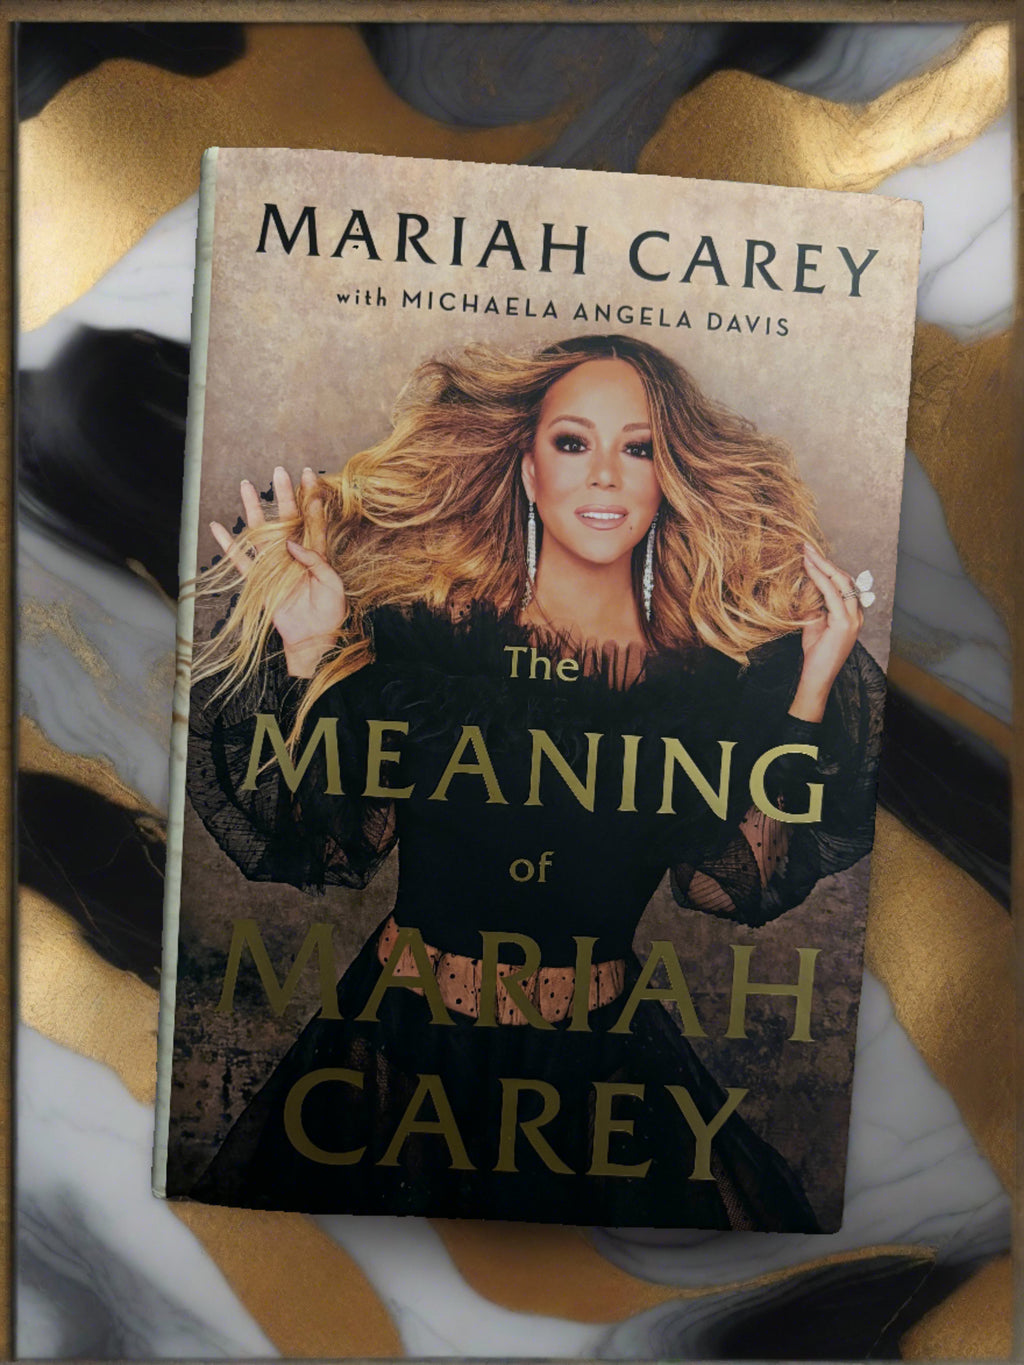 The Meaning of Mariah Carey- By Mariah Carey